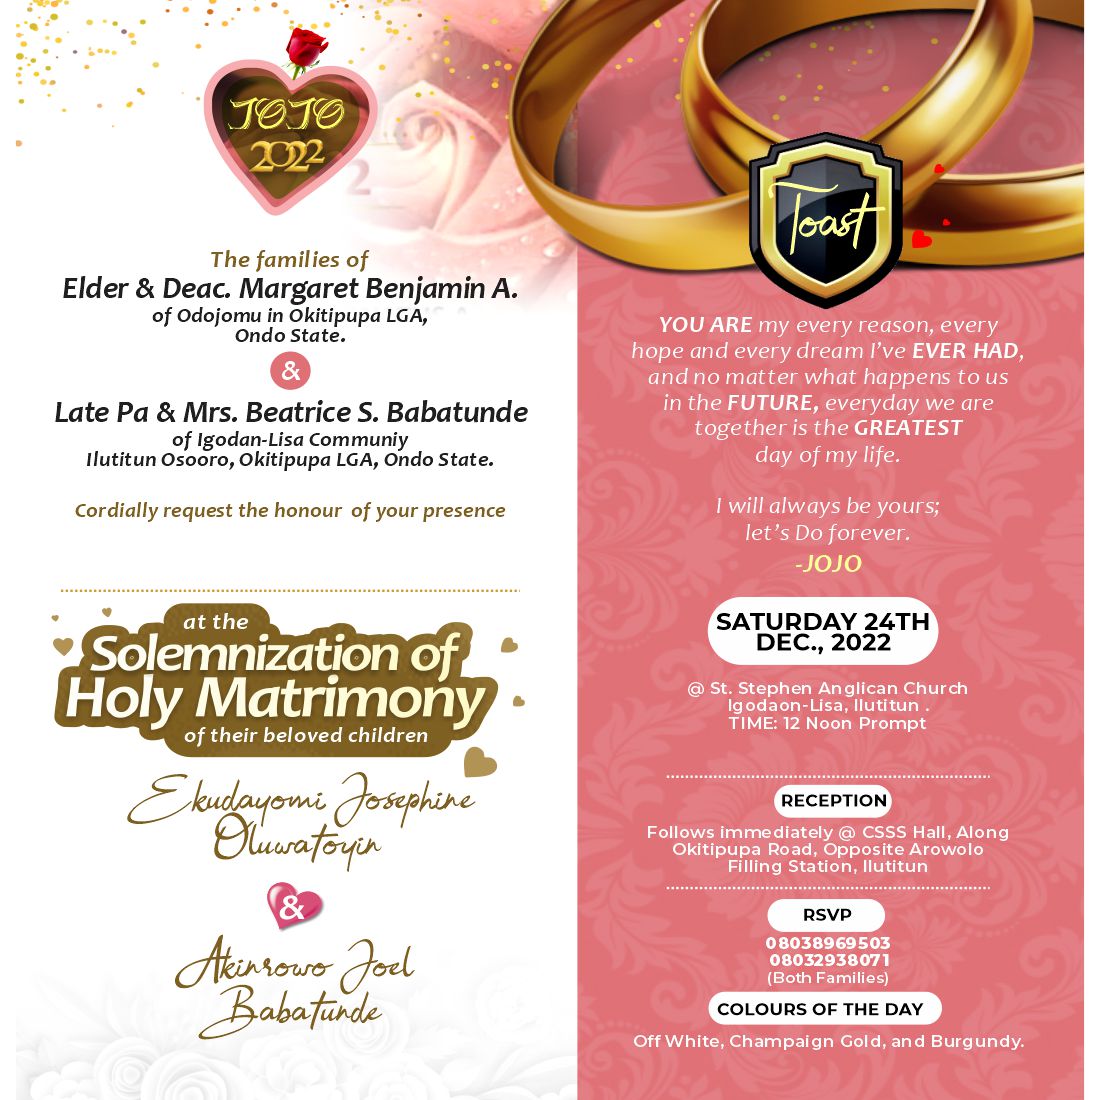 Put A Ring On It Invitations in Gold | Greenvelope.com